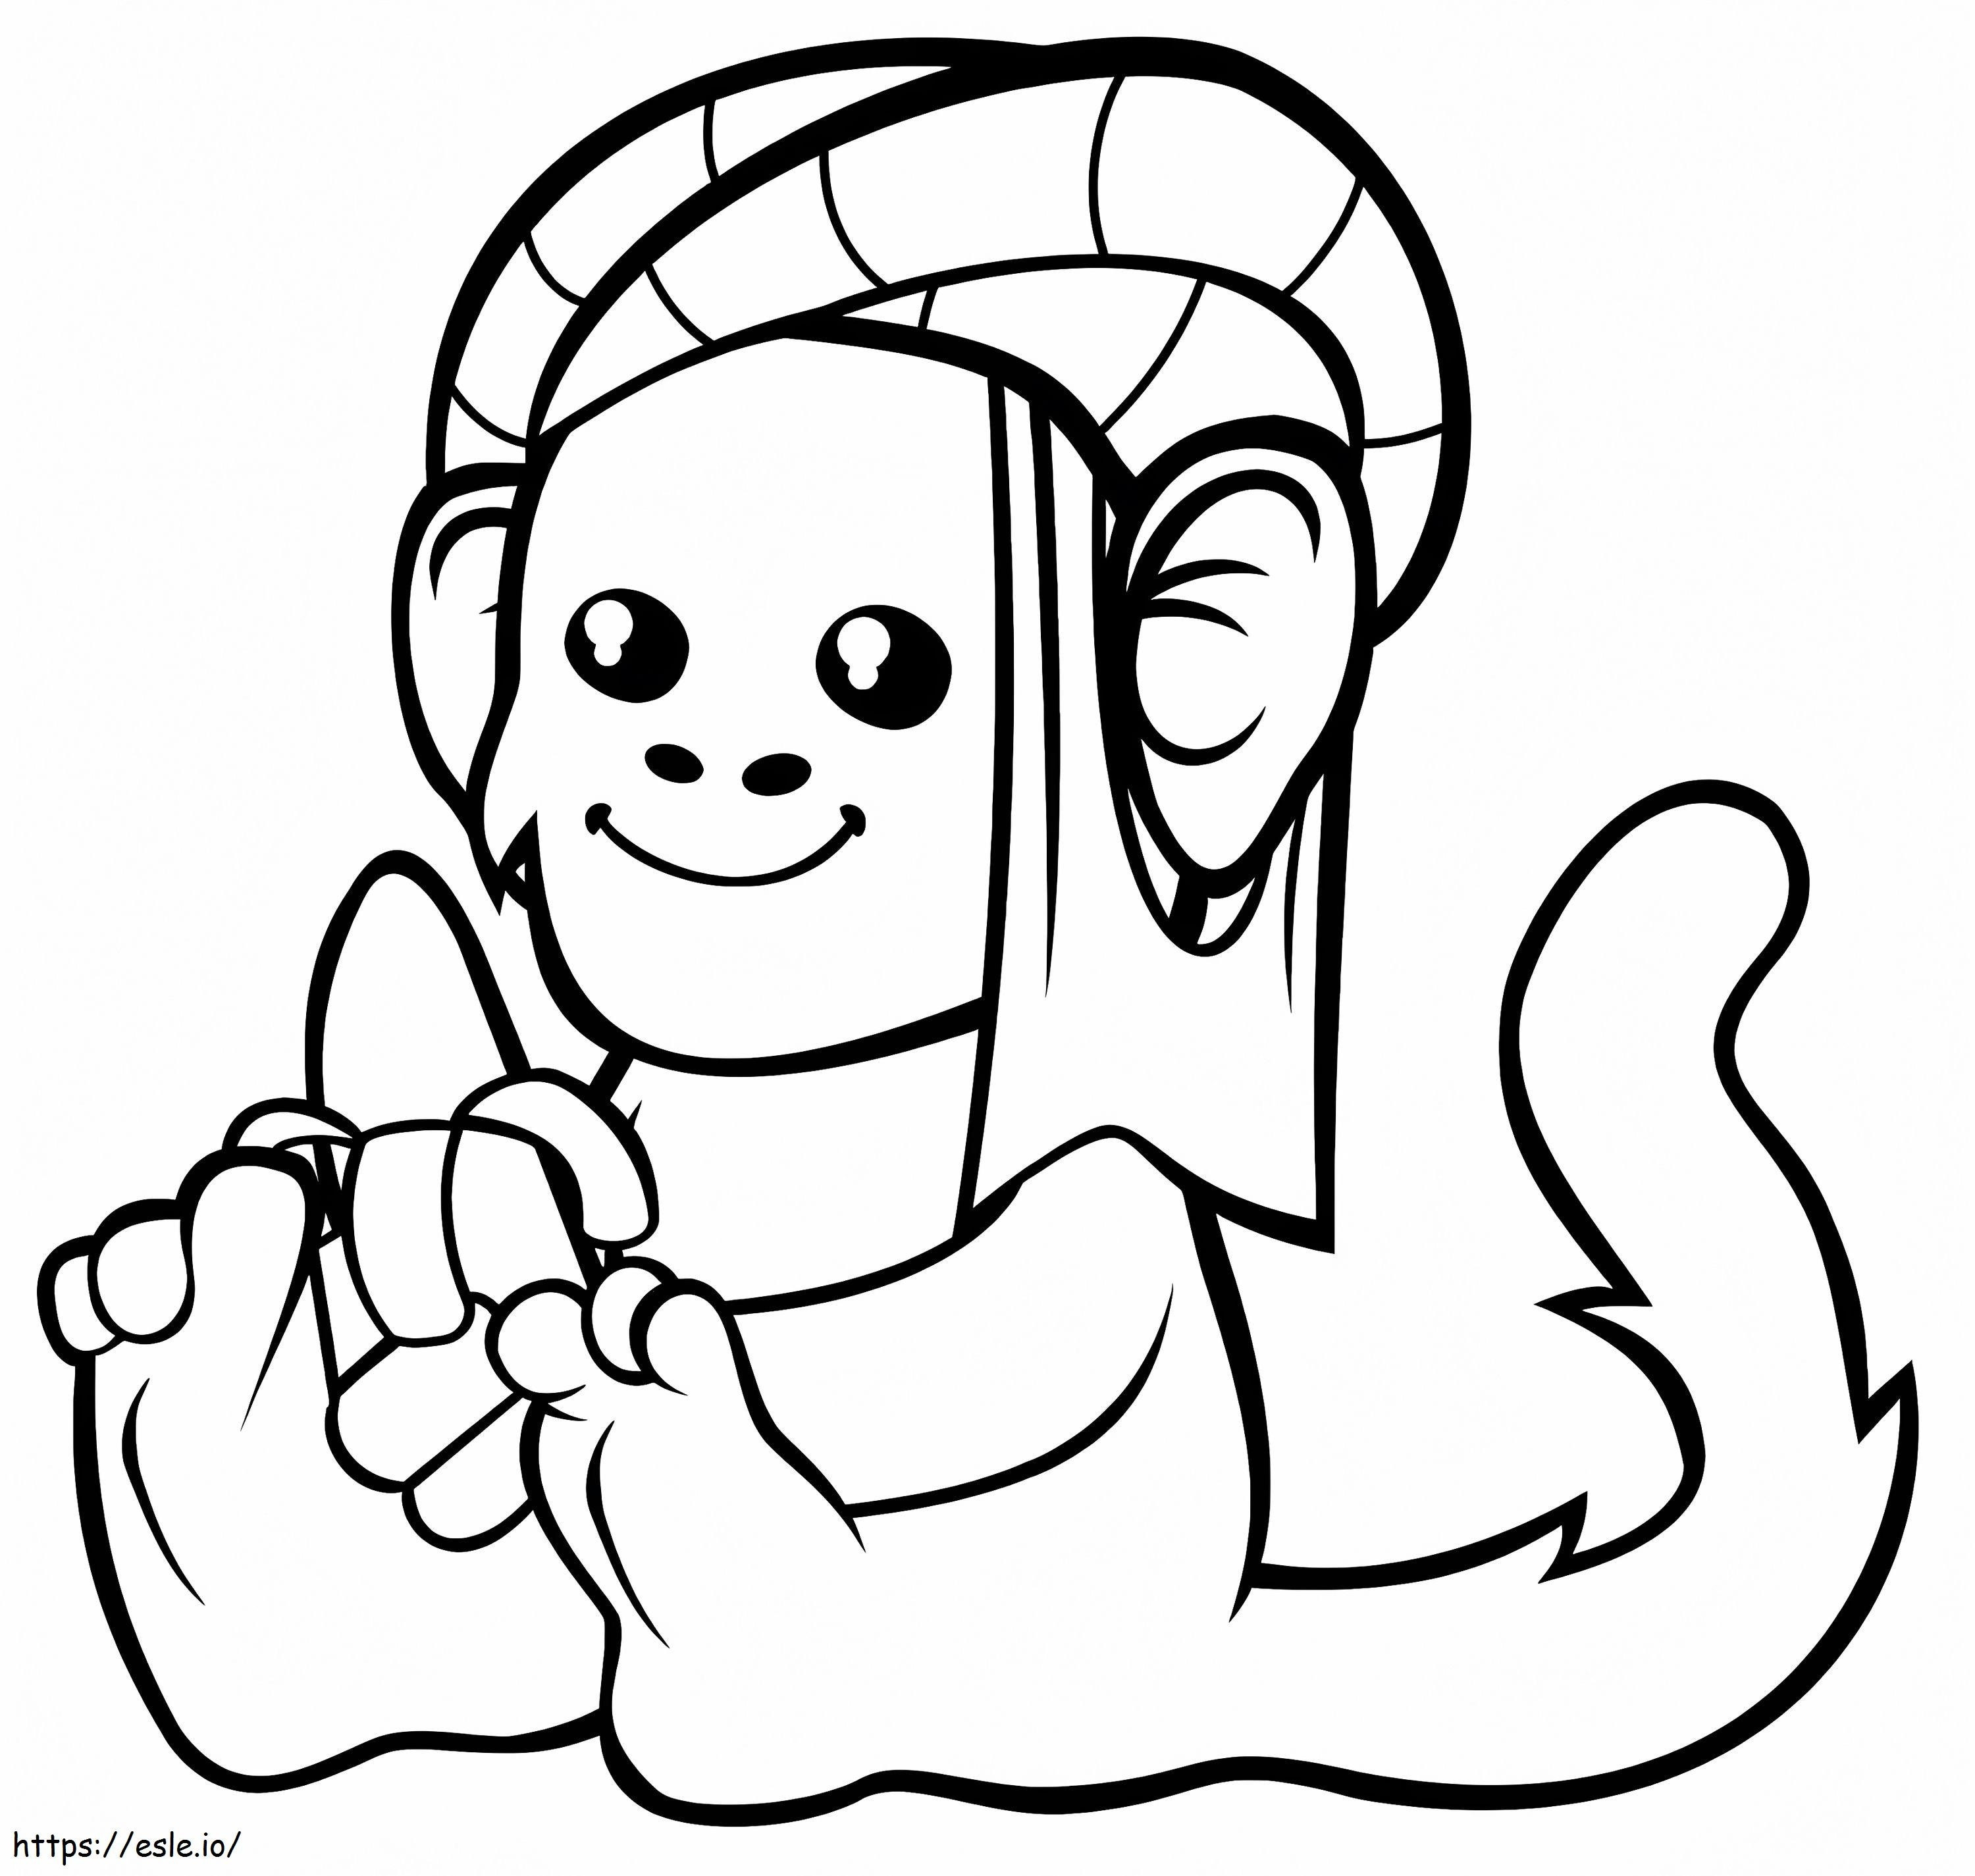 Cute Monkey In A Turban coloring page